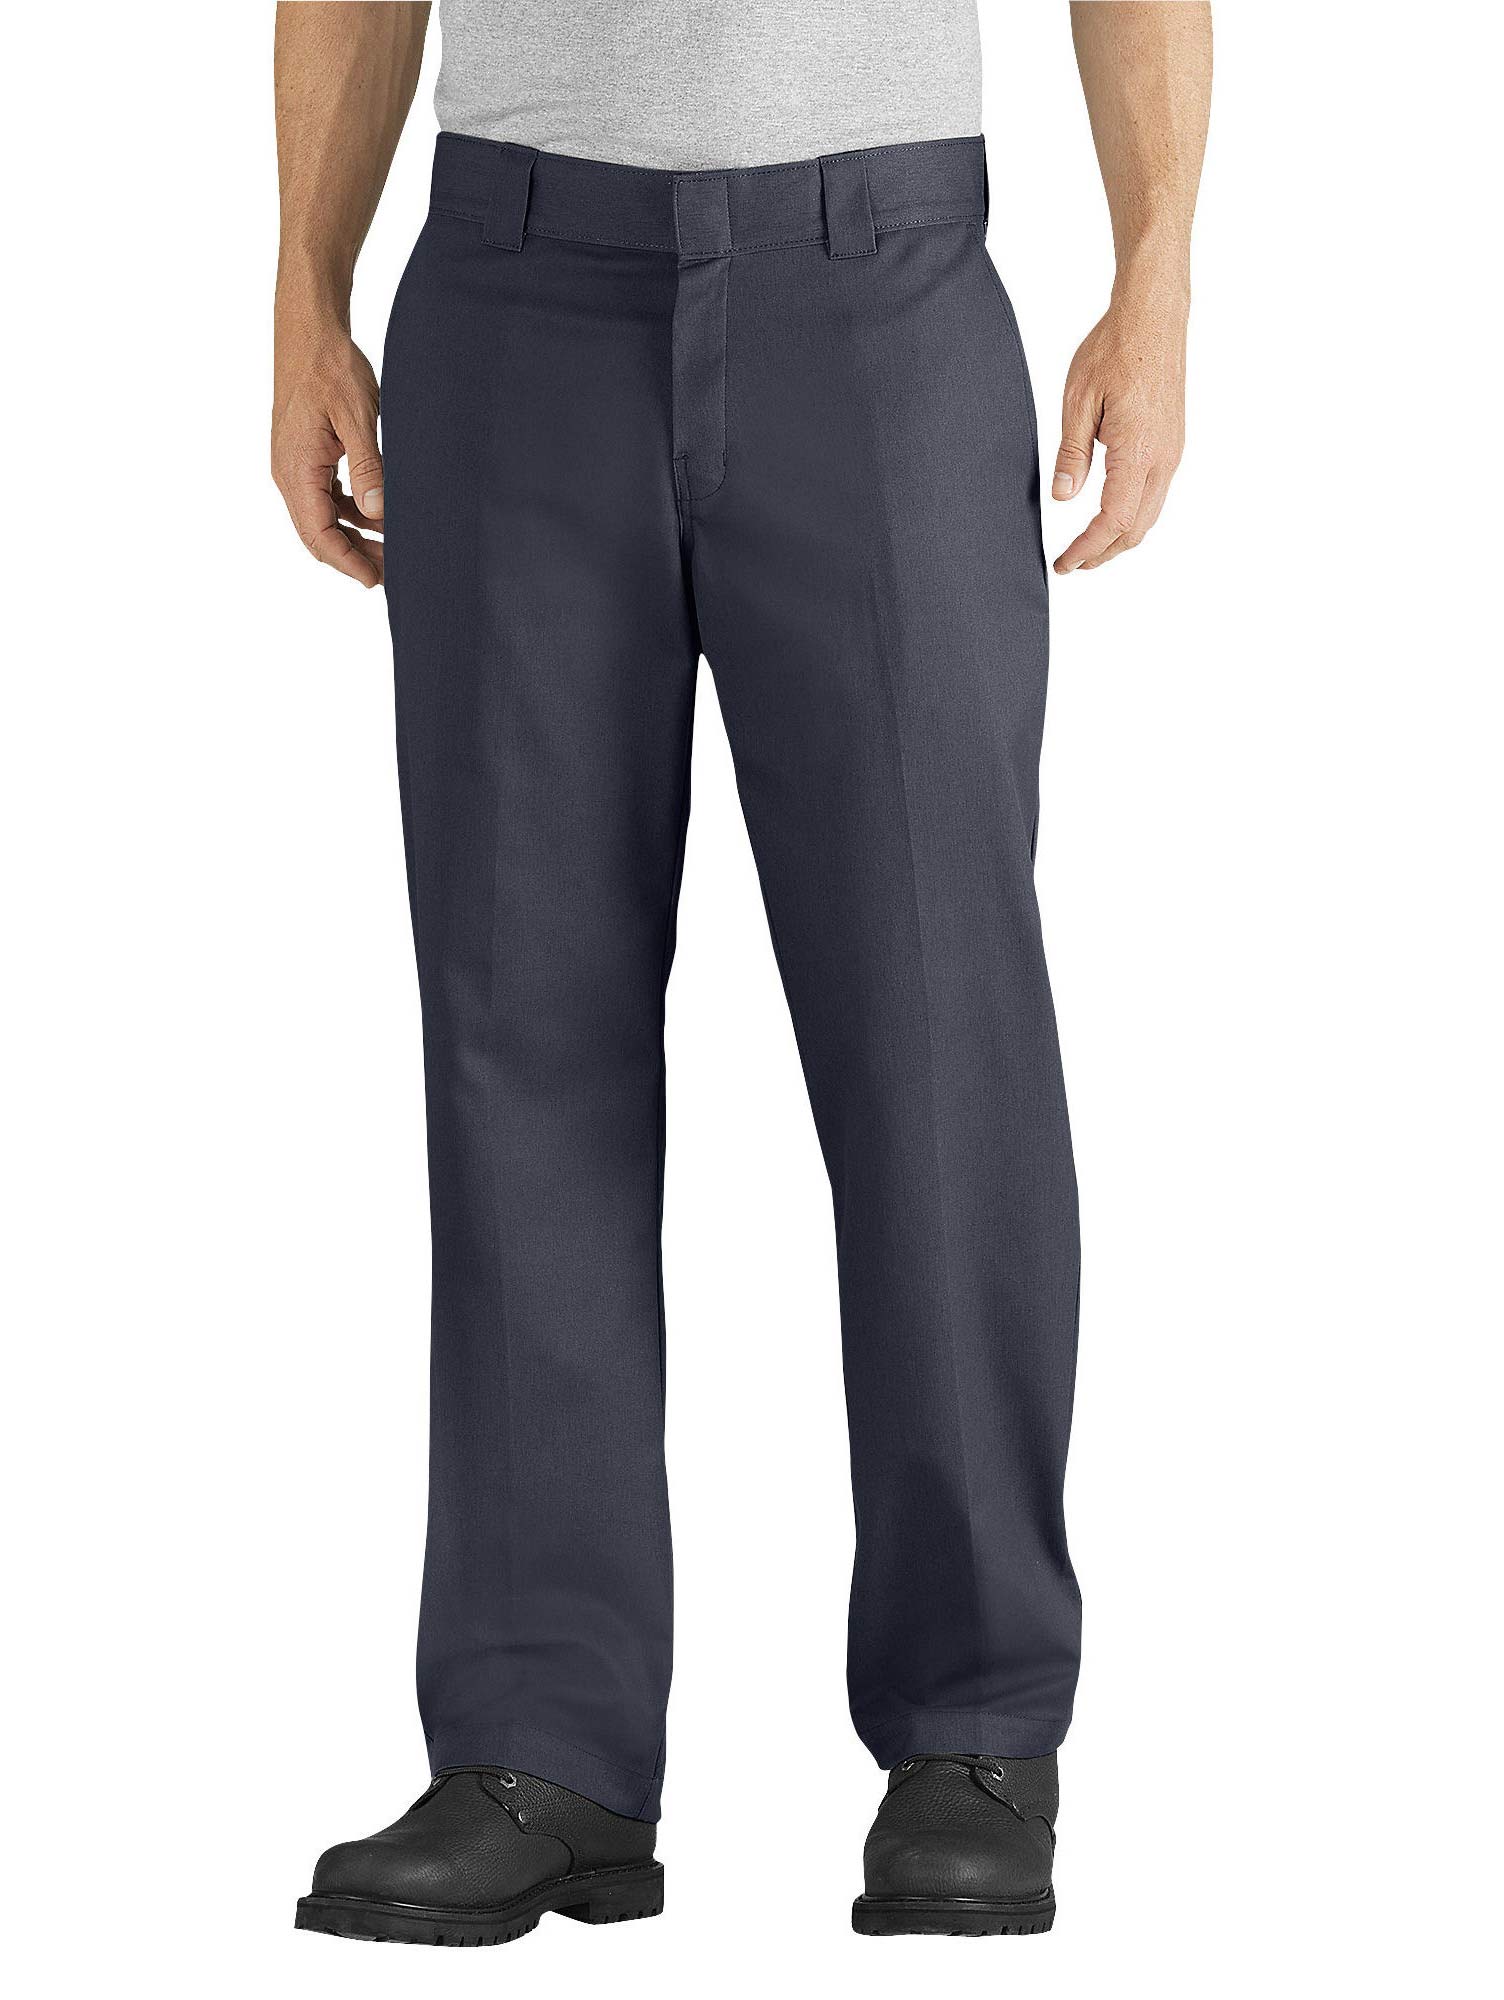 Dickies Relaxed Fit Work Pant-Flex Fabric - WP835